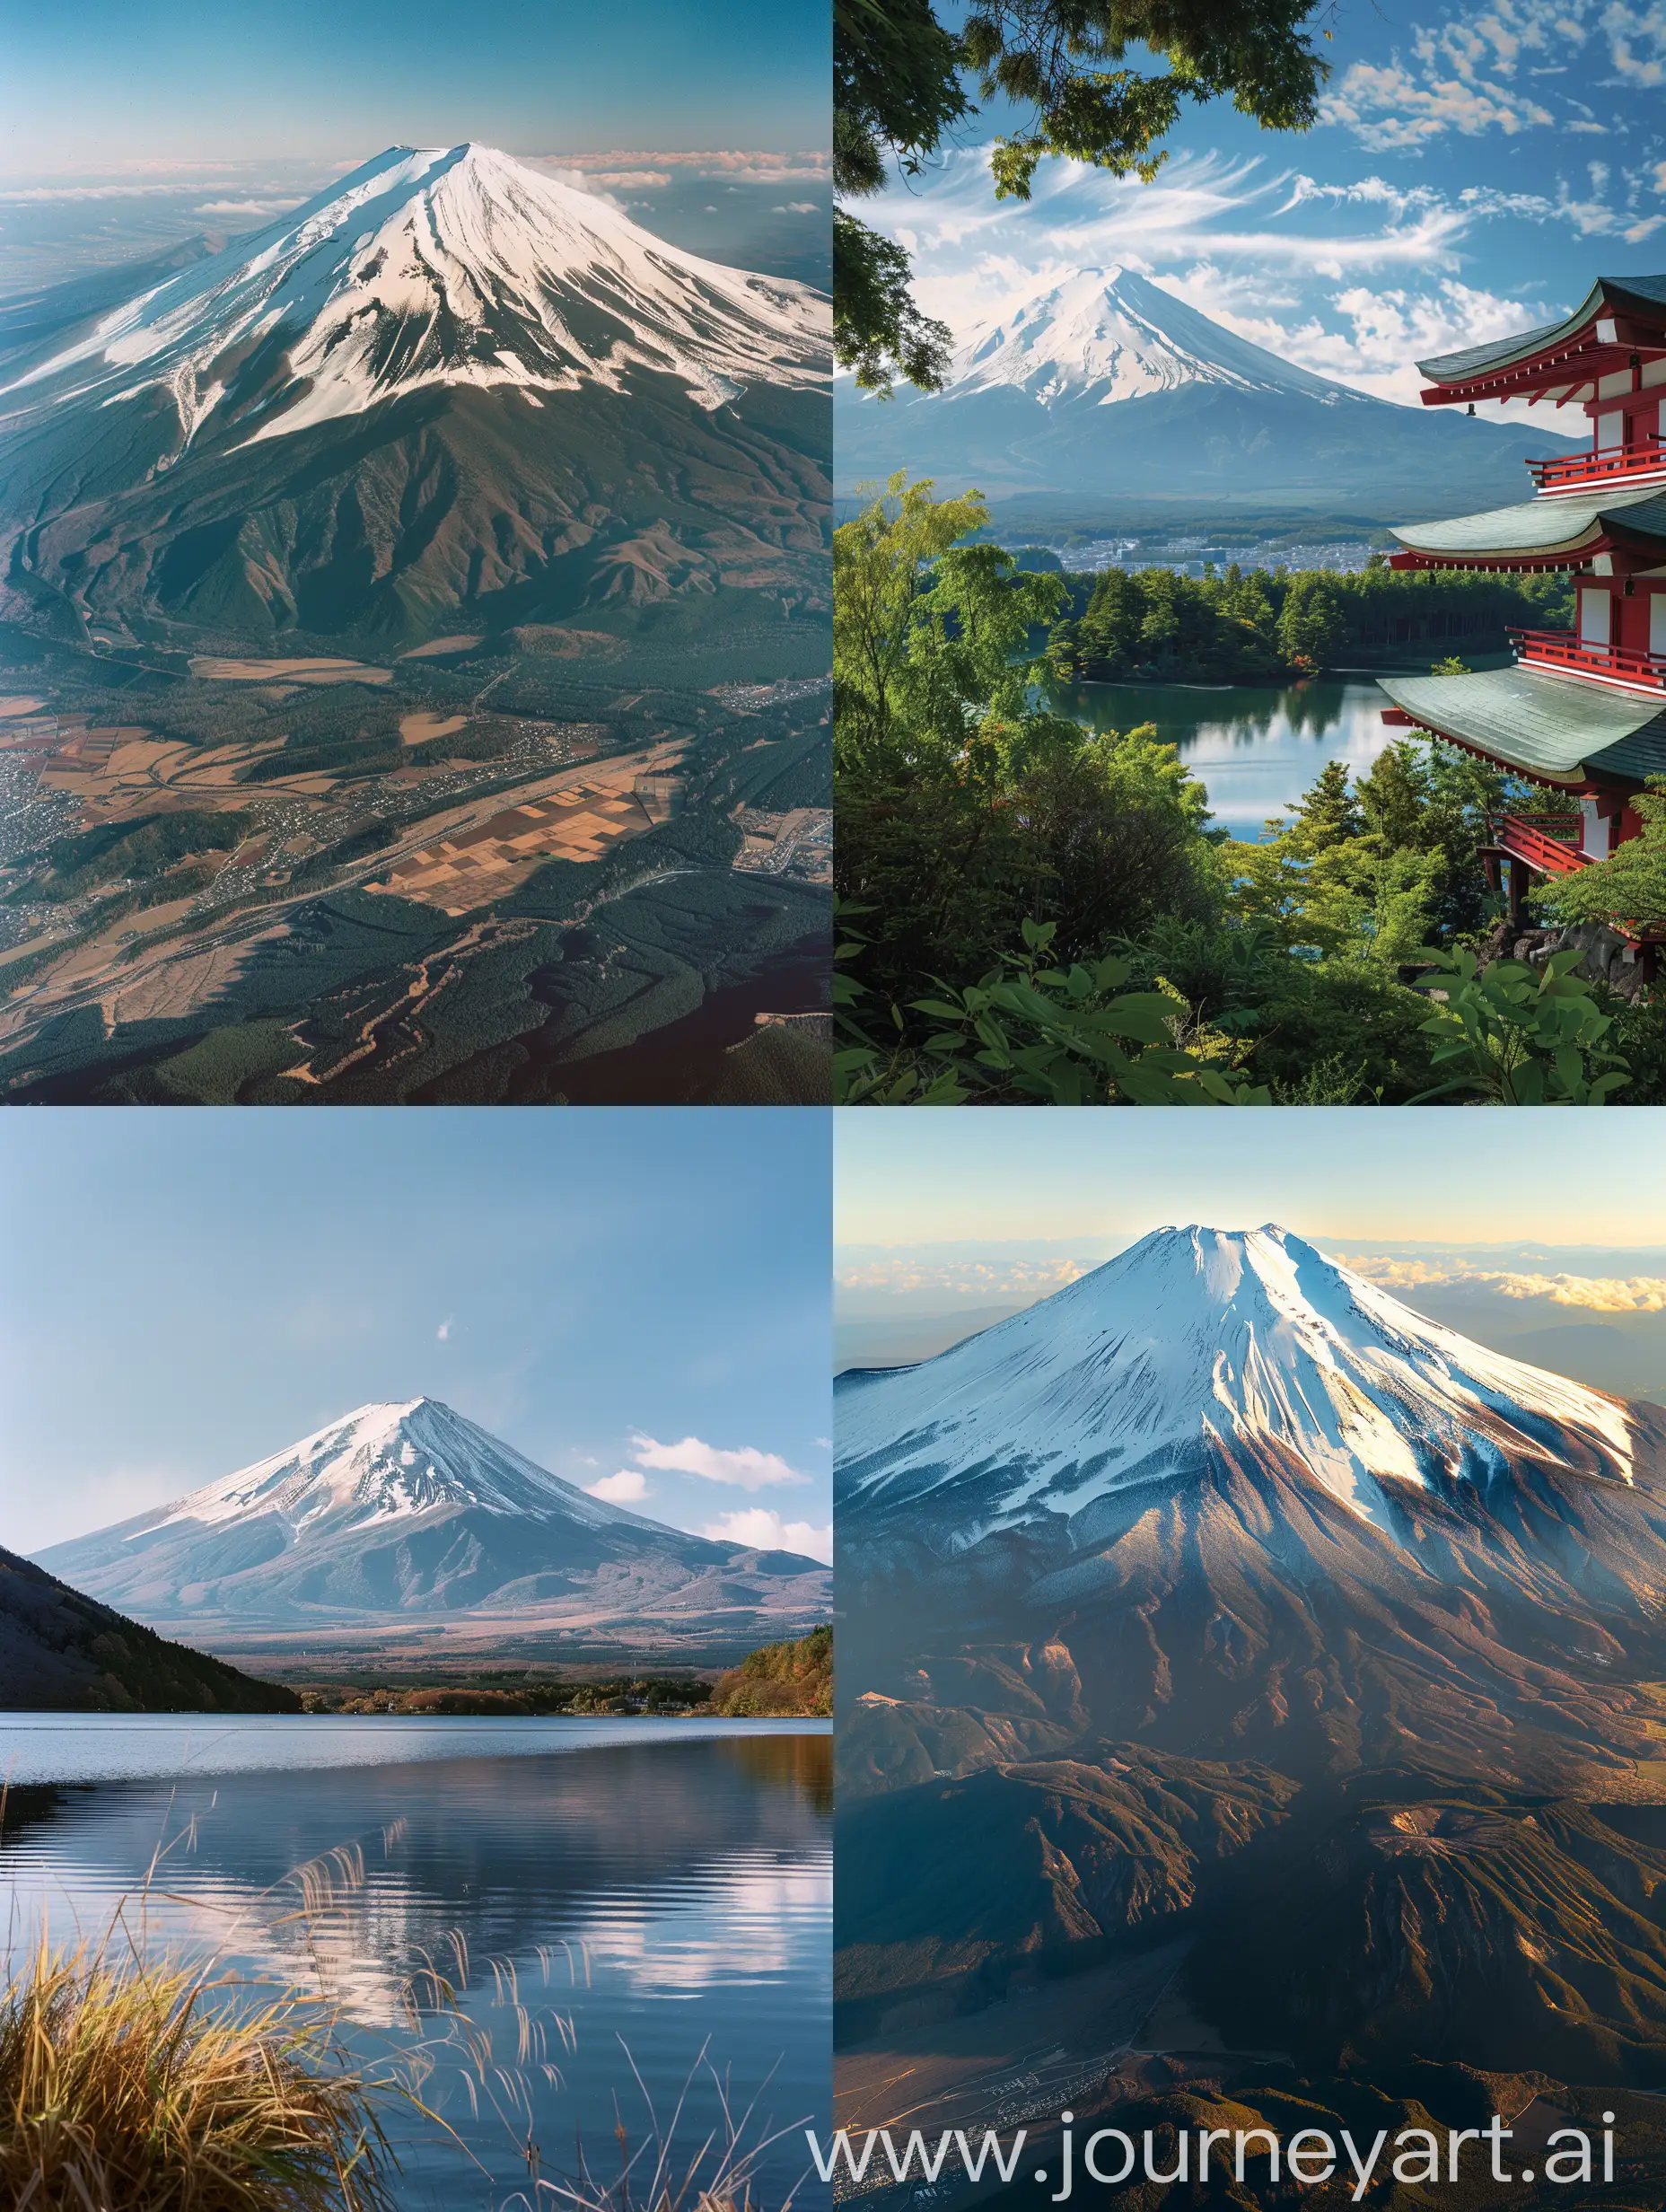 Majestic-Mount-Fuji-Landscape-Captured-with-Hasselblad-Lens-in-High-Resolution